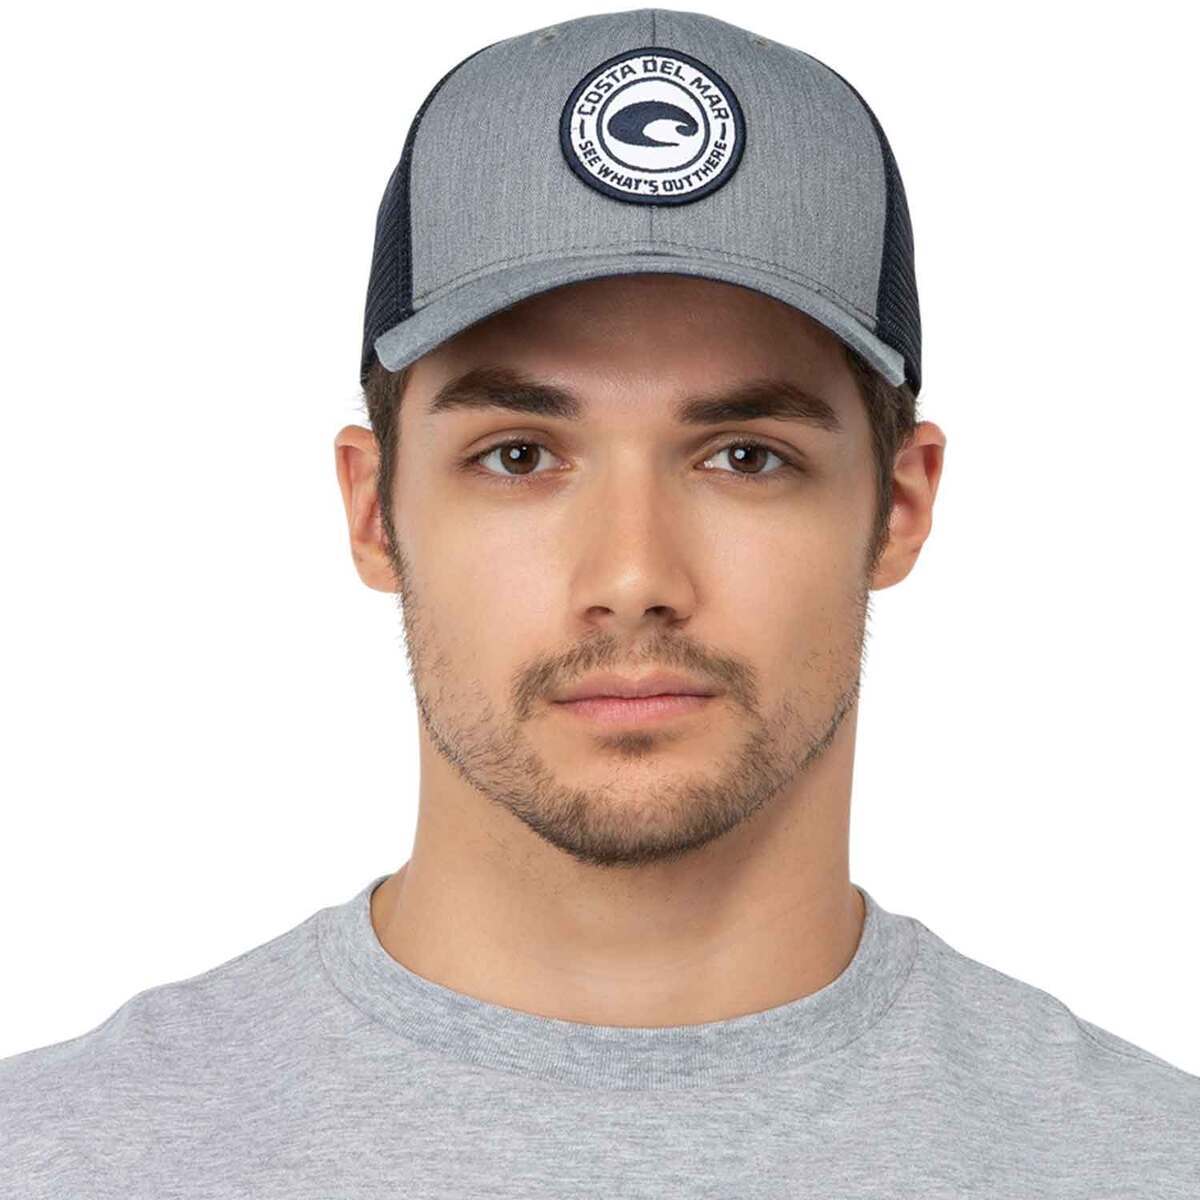 Costa Men's Medallion Trucker Hat - Gray - Gray One Size Fits Most